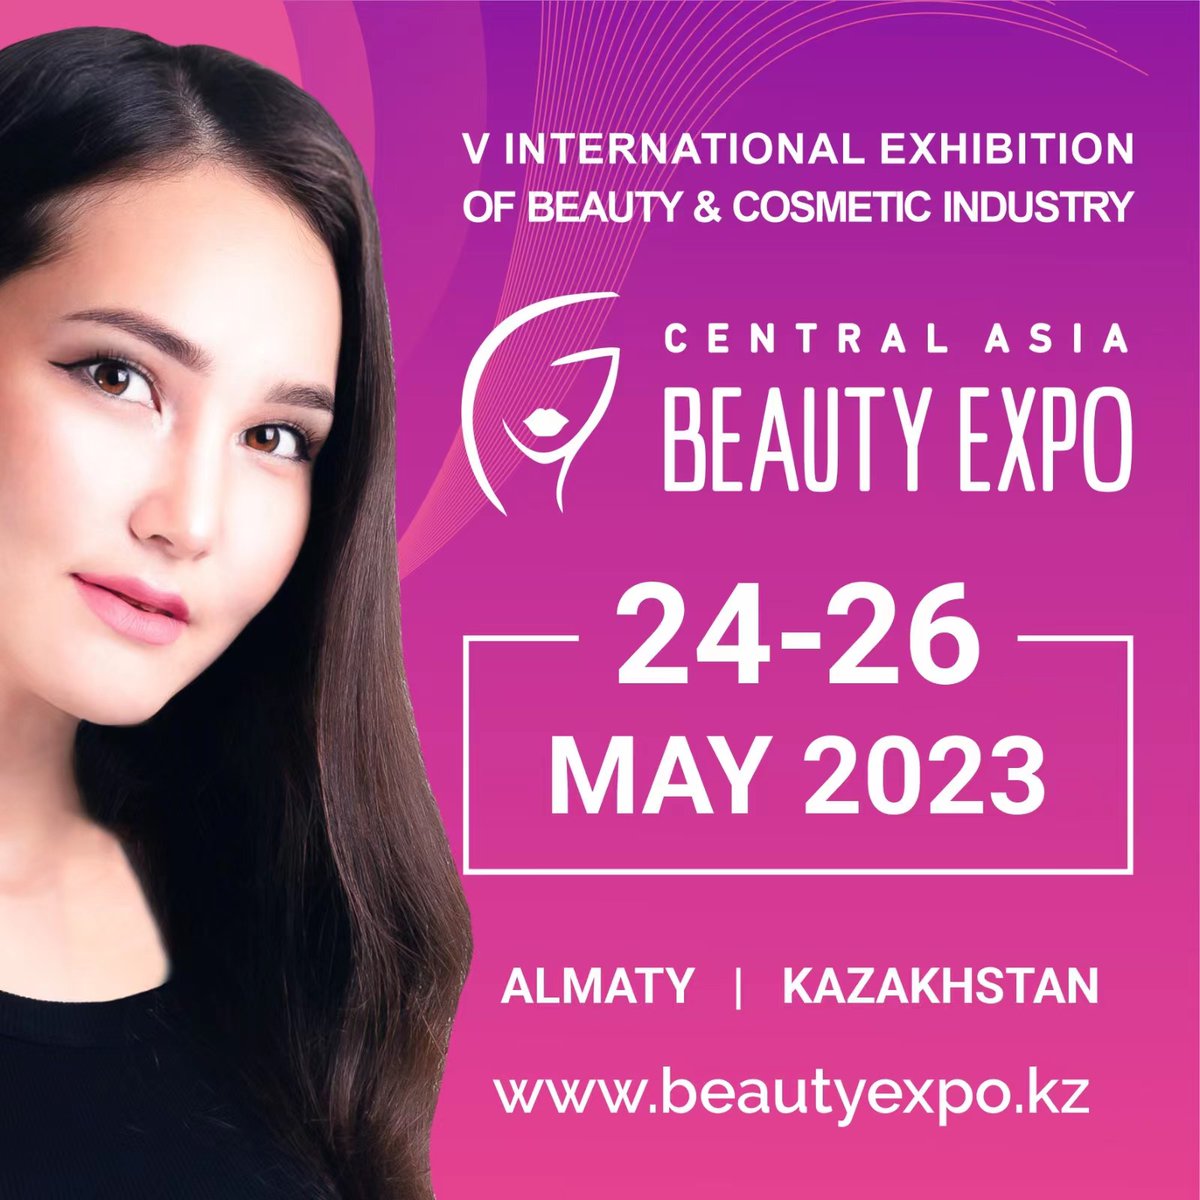 We are proud to become a media partner of BEAUTY EXPO CENTRAL ASIA 2023 and invite you to VISIT the exhibition of cosmetics, cosmetology and household chemicals.

🕑 24-26 MAY 2023

📌 Kazakhstan, Almaty, Atakent Exhibition Center

#beautyexpo #beautyevent #beautymarketing